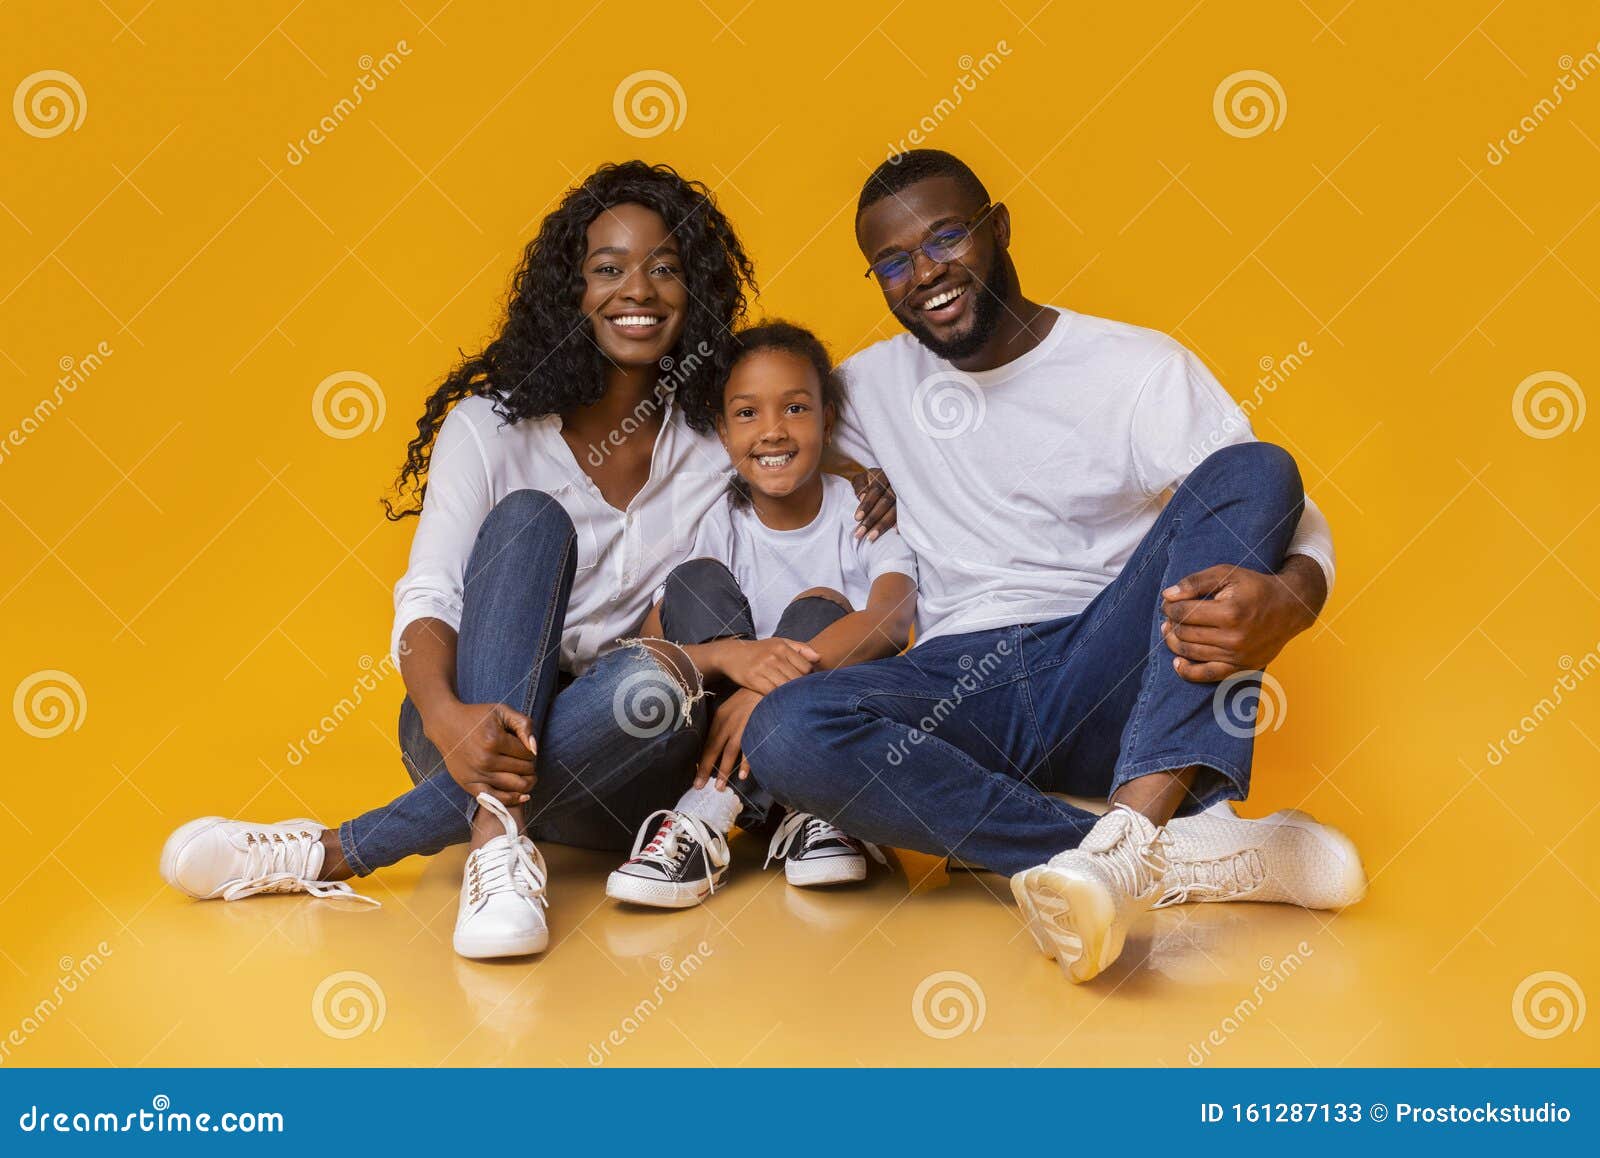 beautiful african american family sitting on floor and smiling